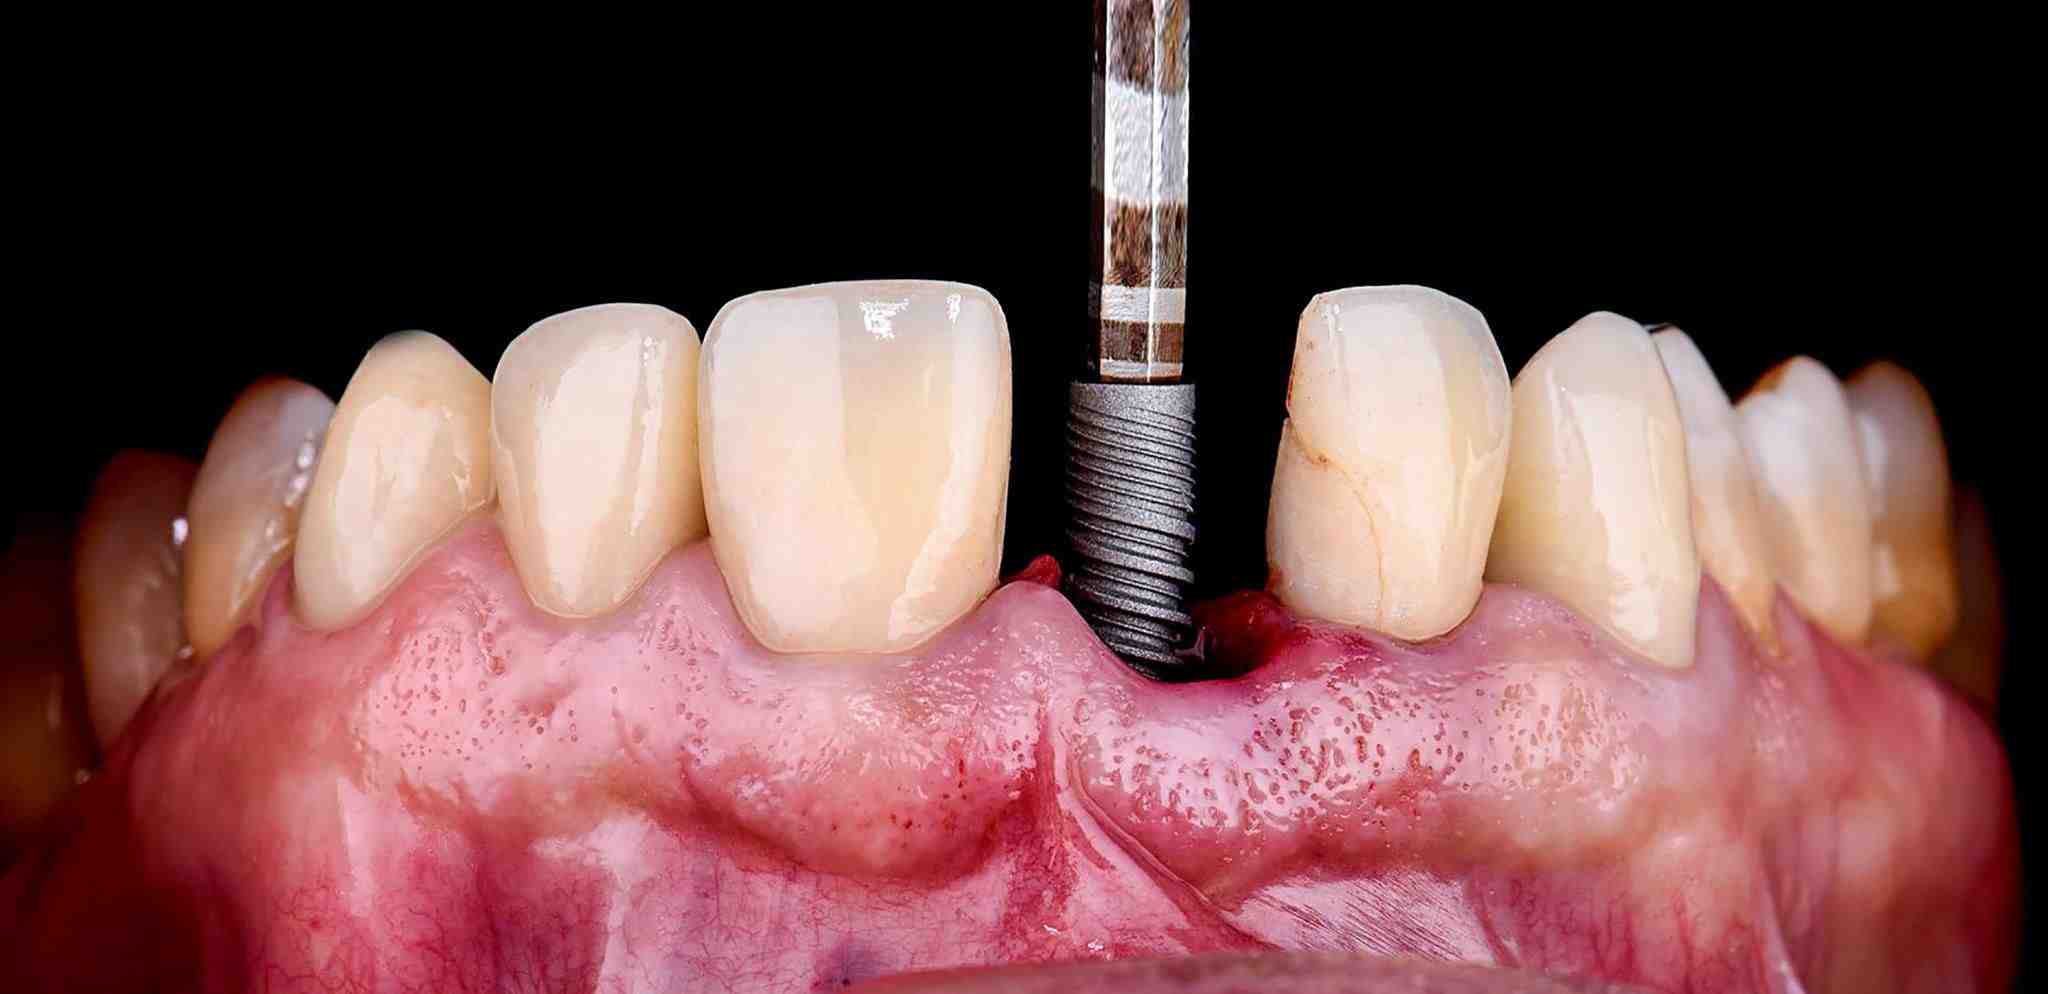 how-long-does-it-take-to-get-dental-implants-dental-news-network